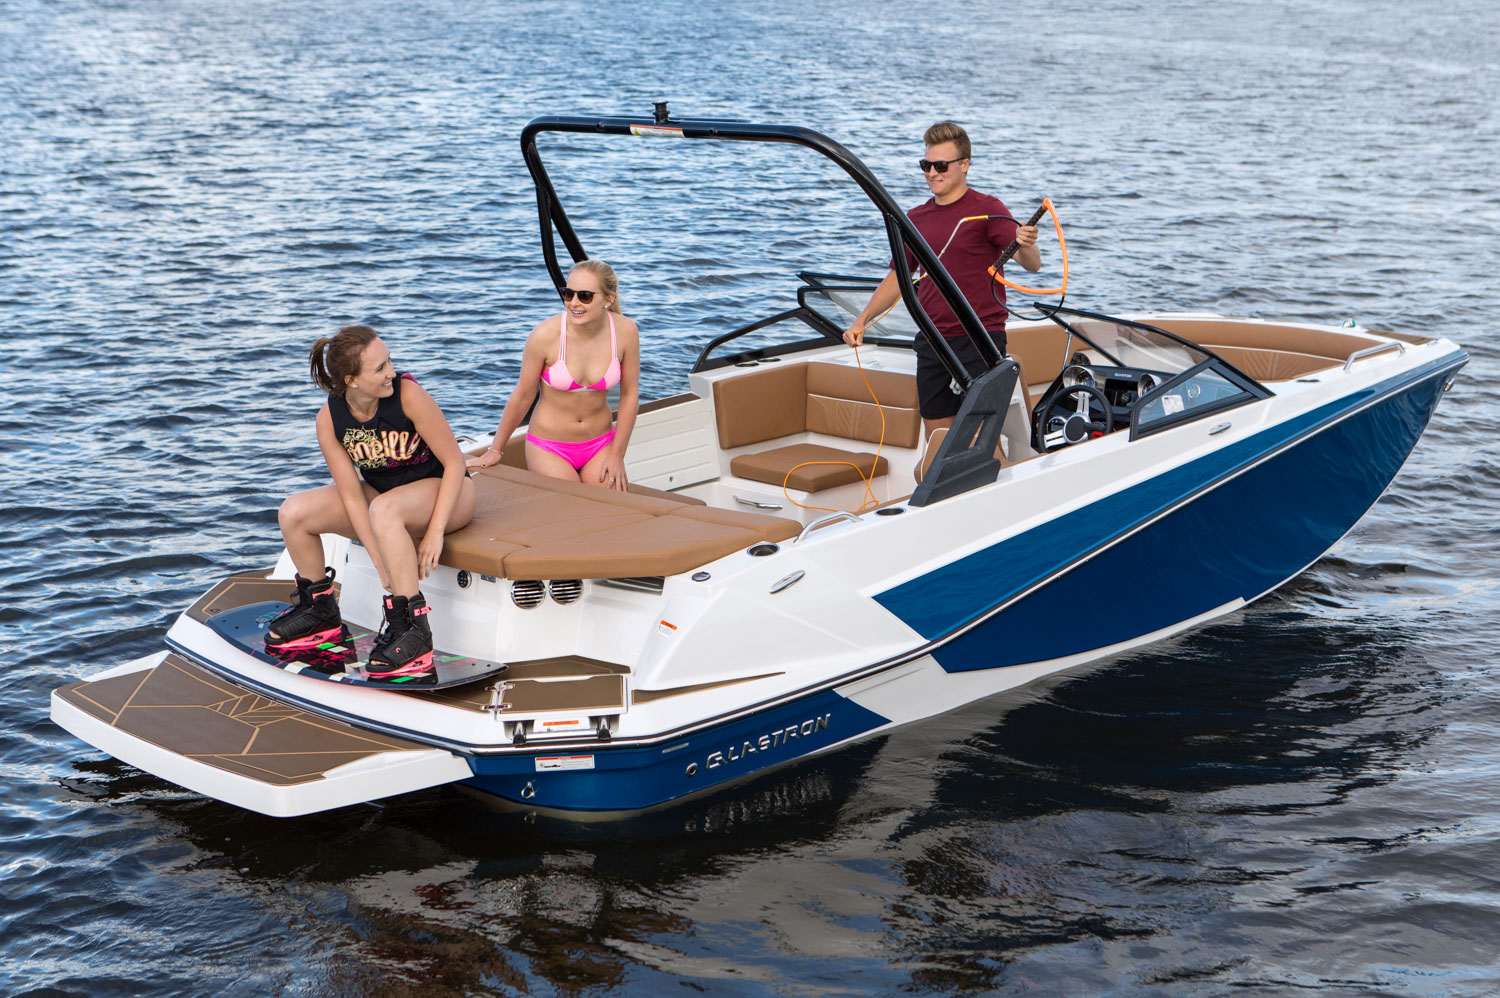 Glastron boats for sale in Florida - Boat Trader